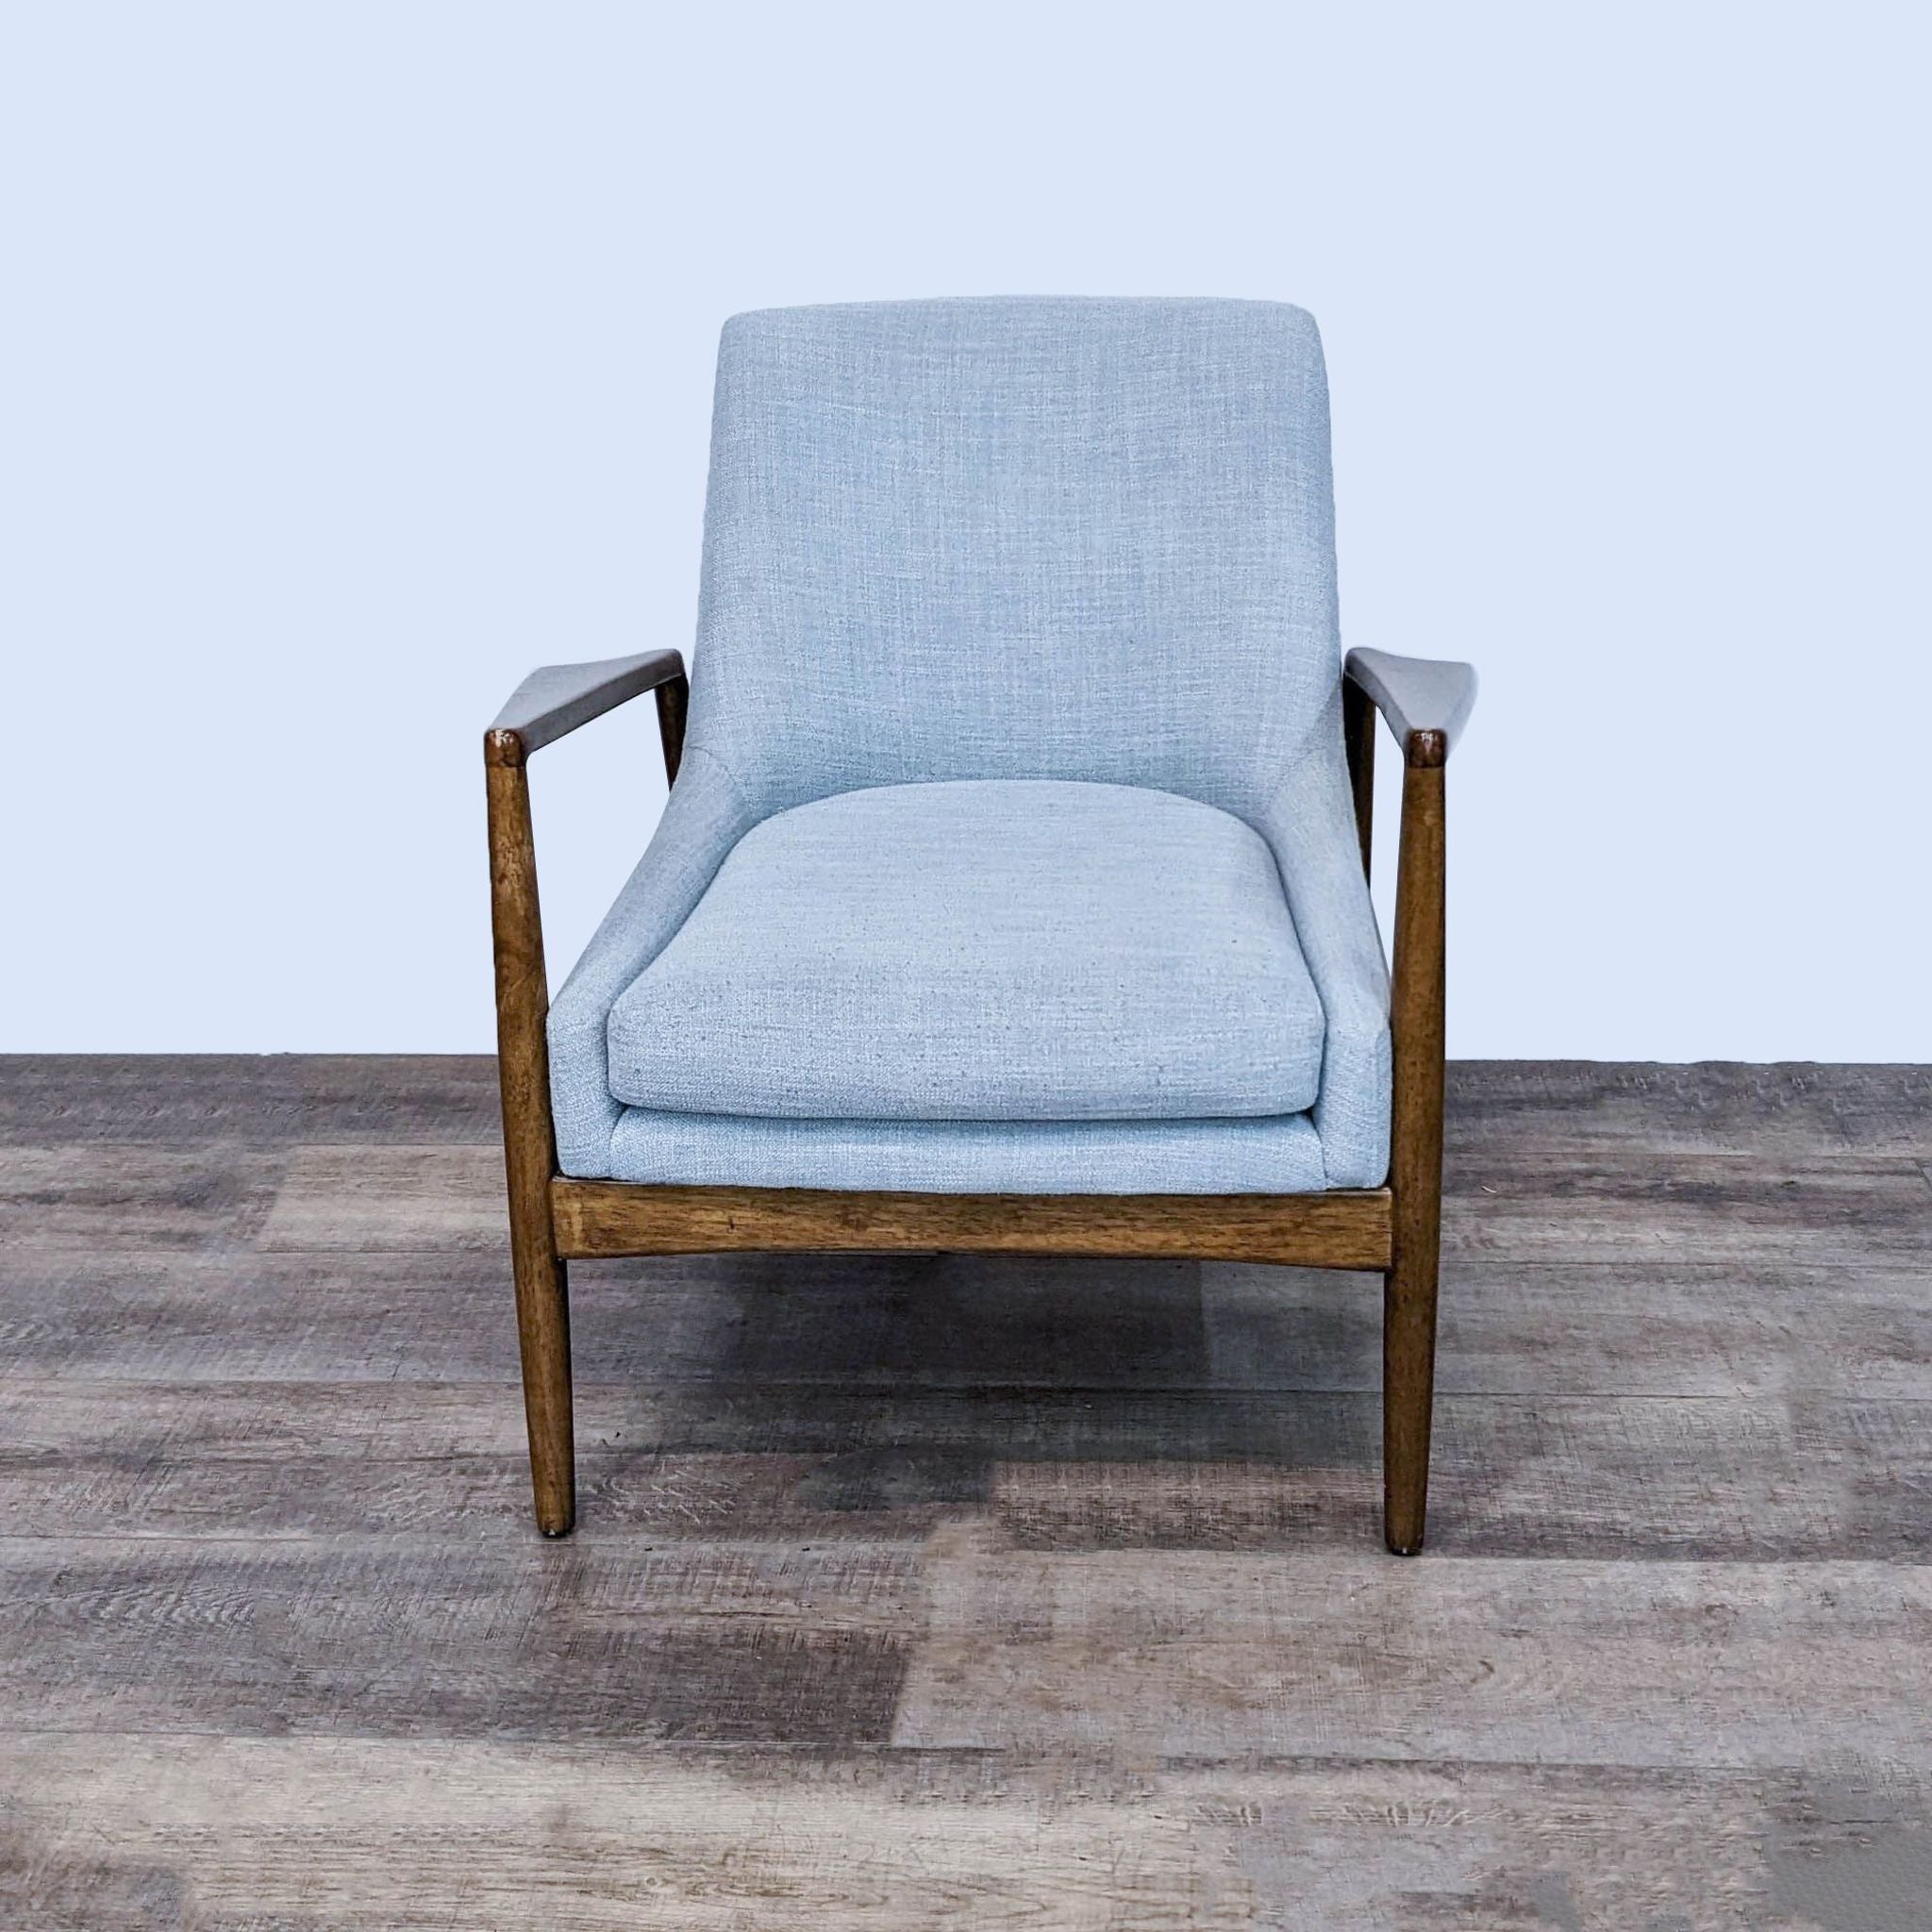 Alt text 1: Prescott Accent Chair by Madison Park with light blue upholstery and solid wood frame in a brown finish, front view on wood floor.